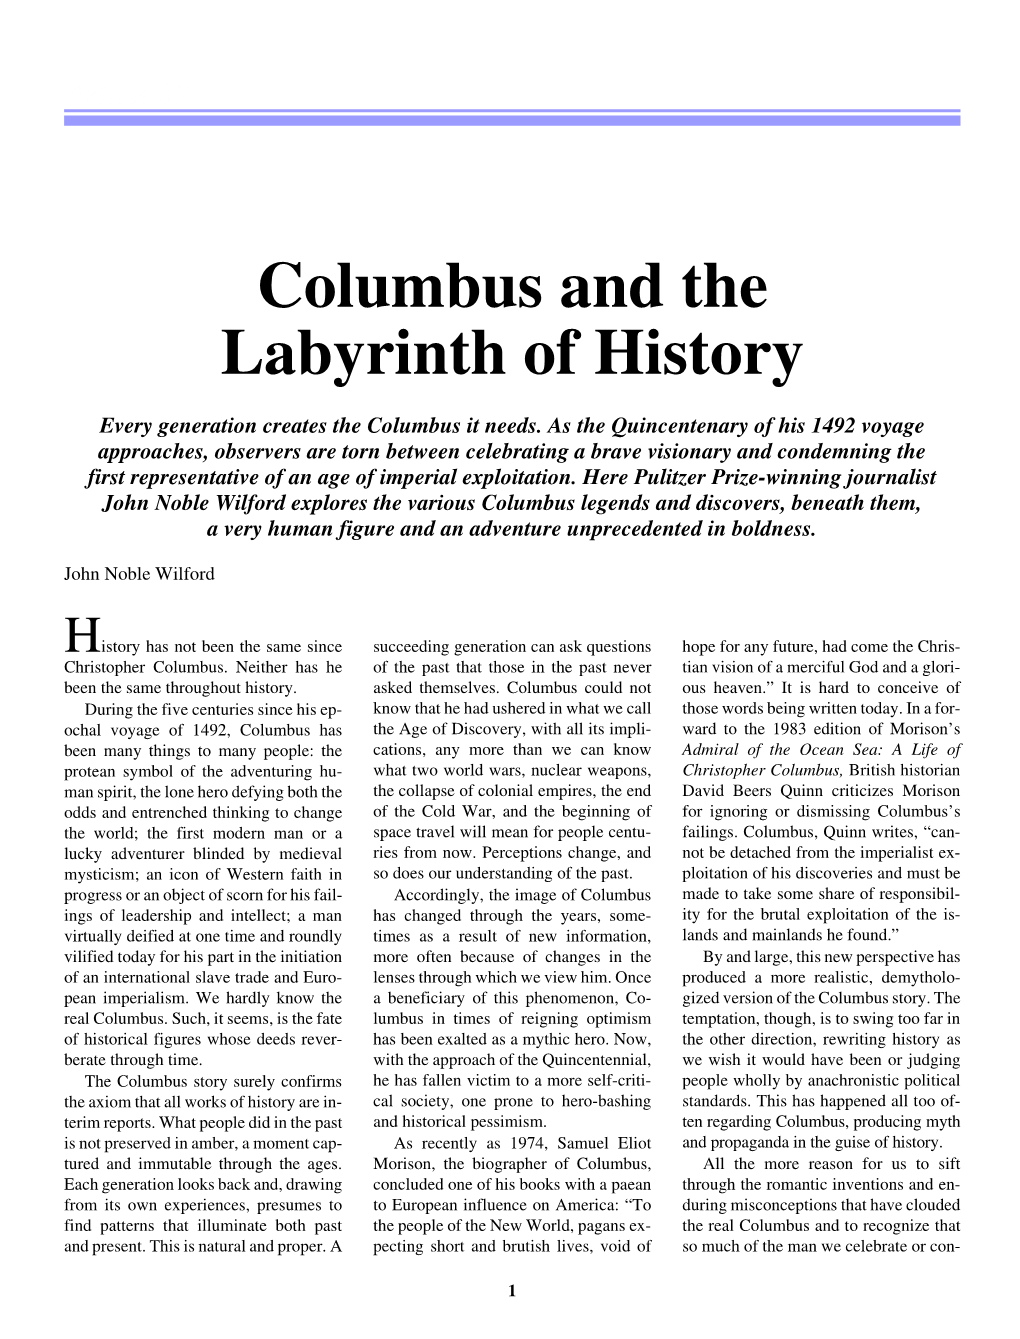 Columbus and the Labyrinth of History